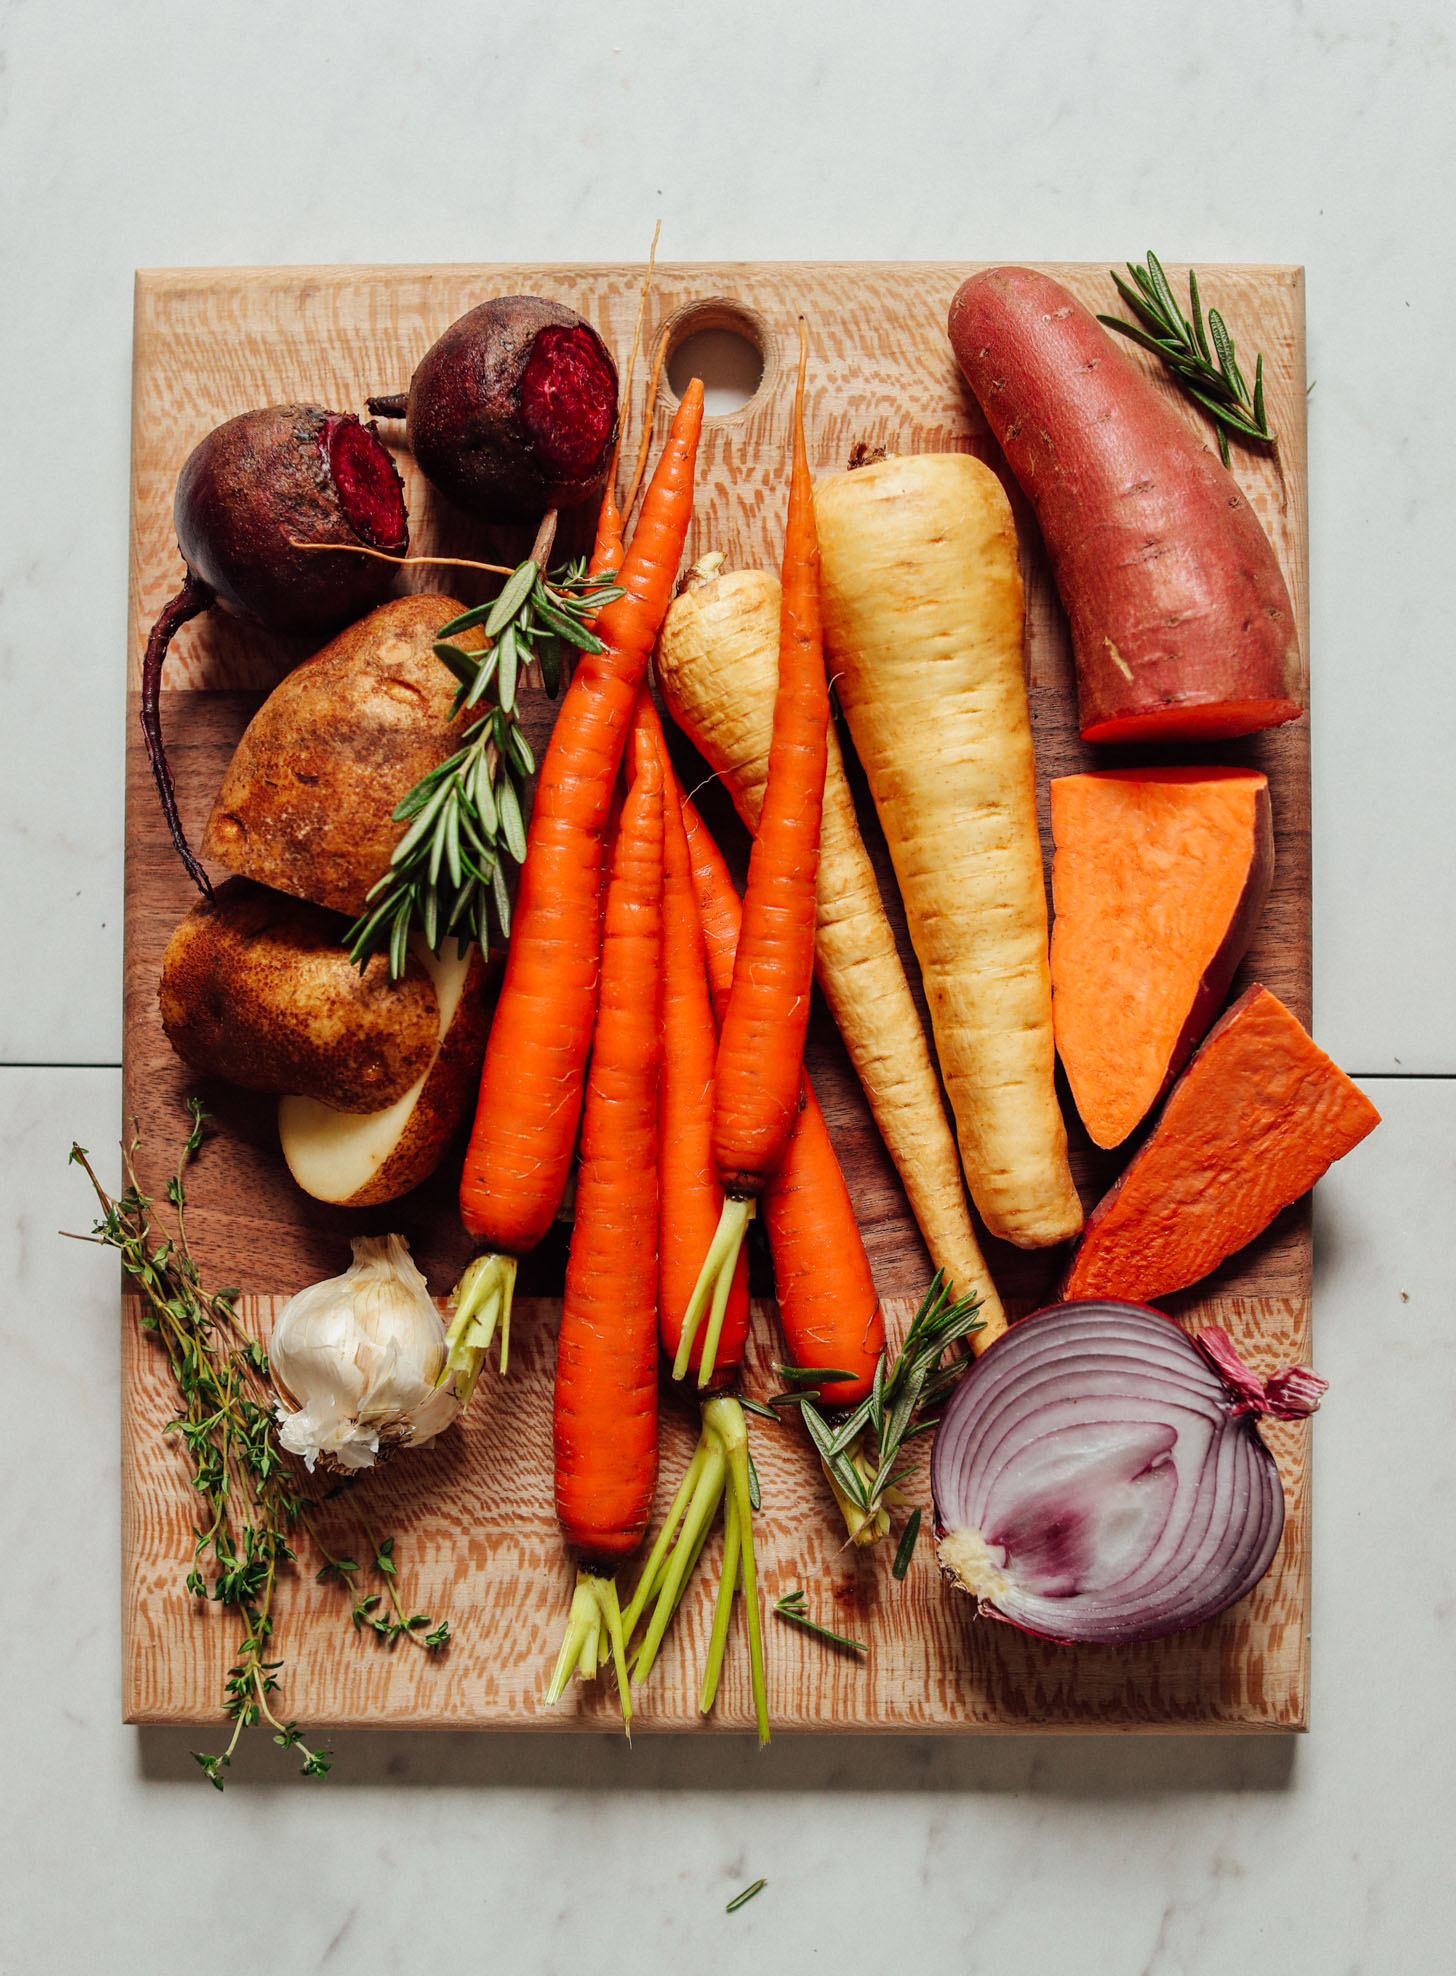 Wood cutting board filled with fresh beets, potatoes, parsnips, carrots, onions, garlic, and herbs for roasting